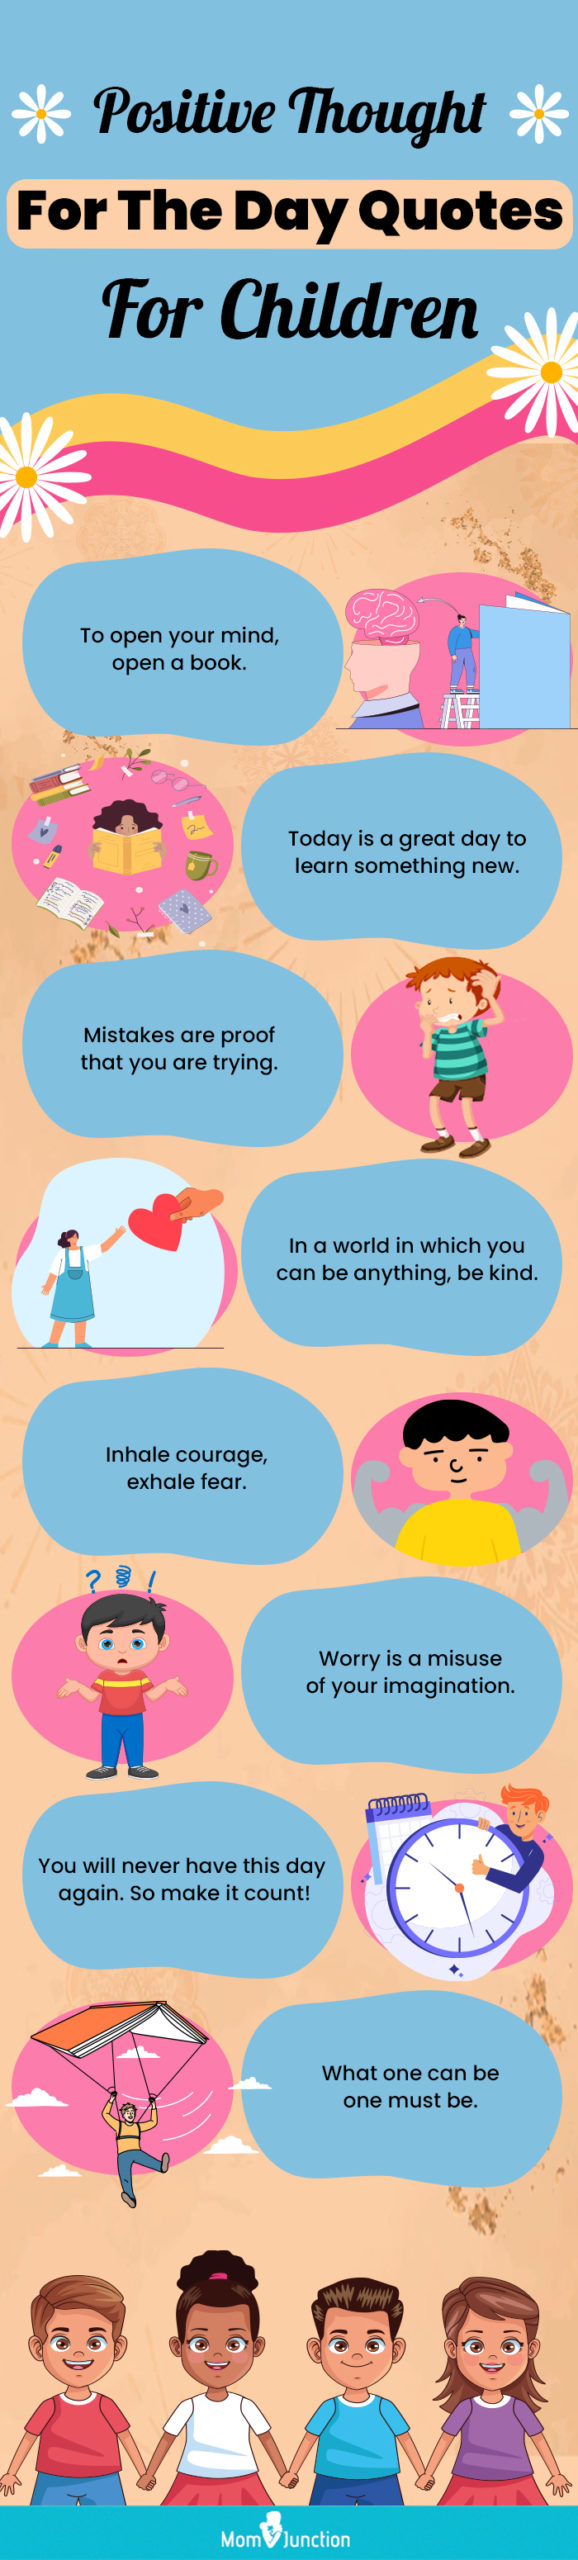 positive thought for the day quotes for kids (infographic)